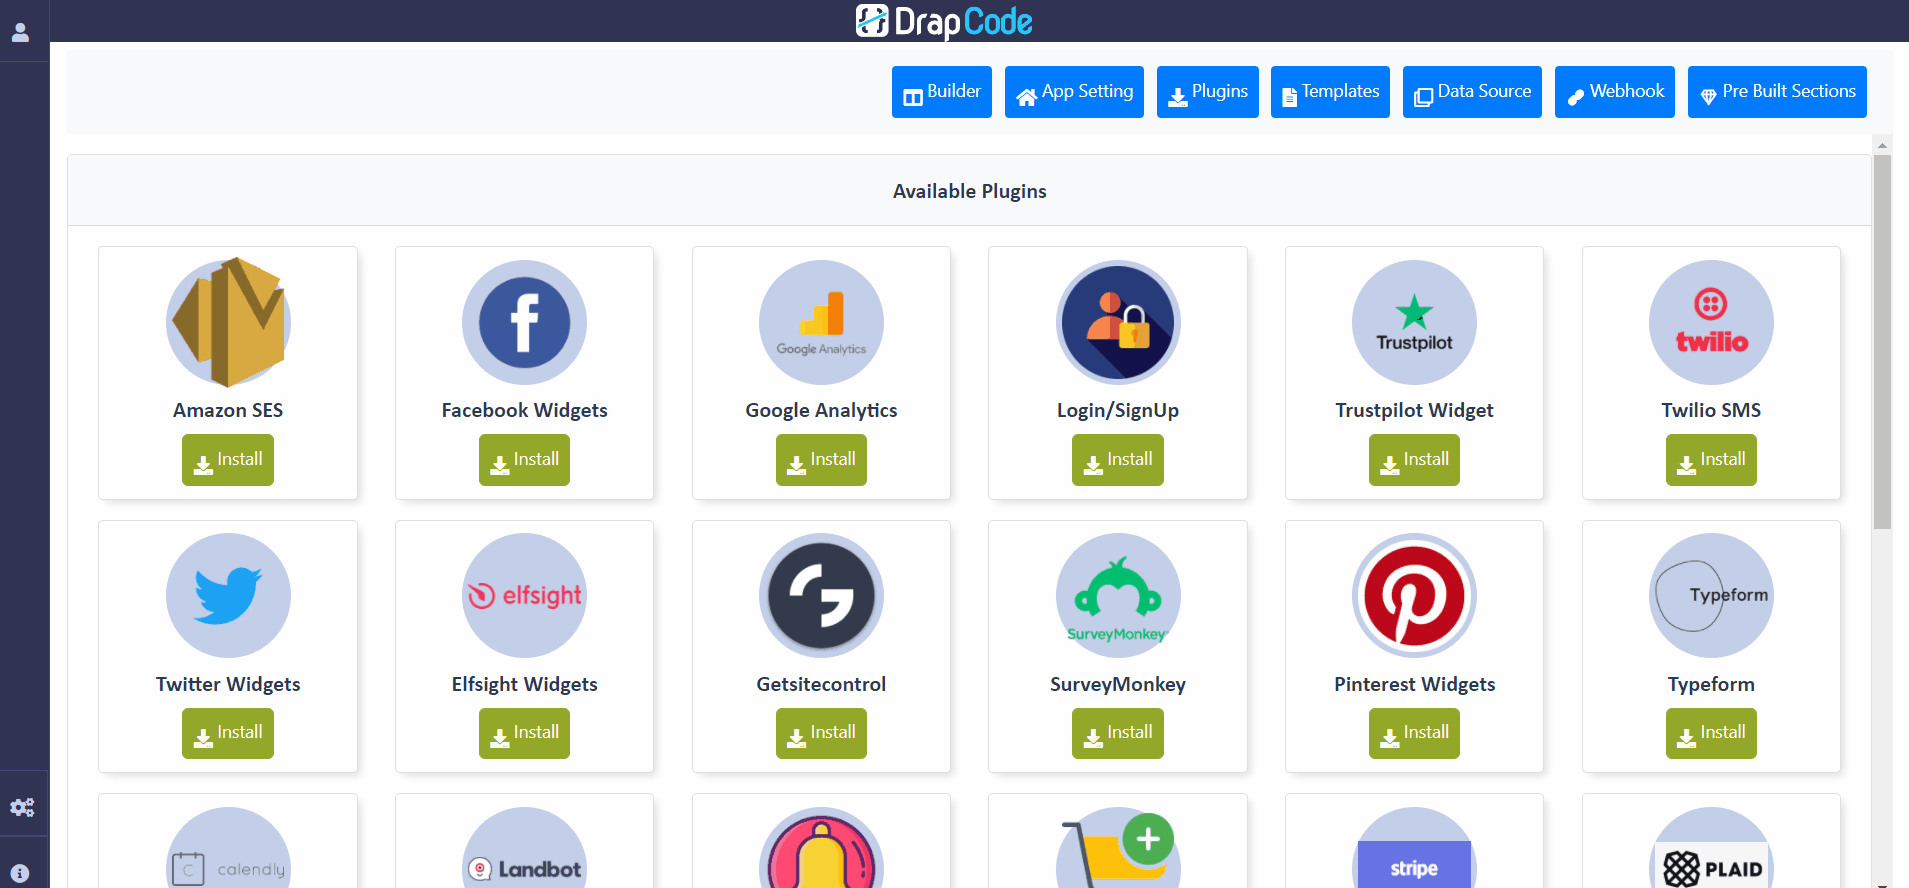 Know more about DrapCode